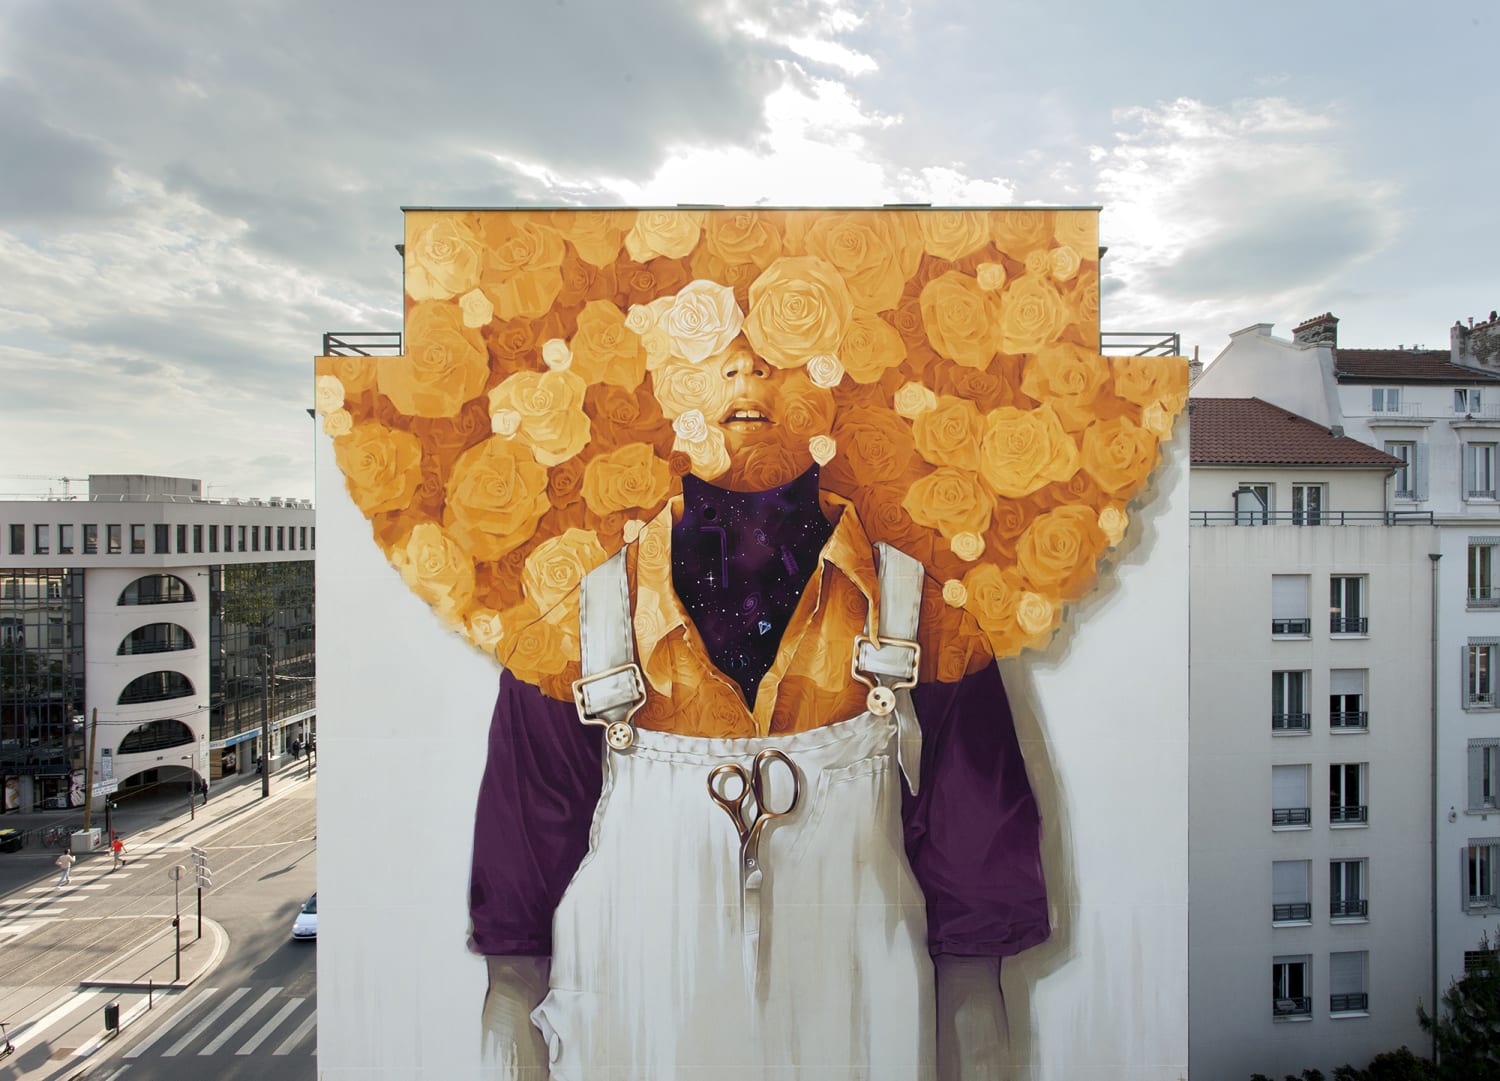 Radiant Flowers Overlook Lyon, France in New Mural by INTI — Colossal